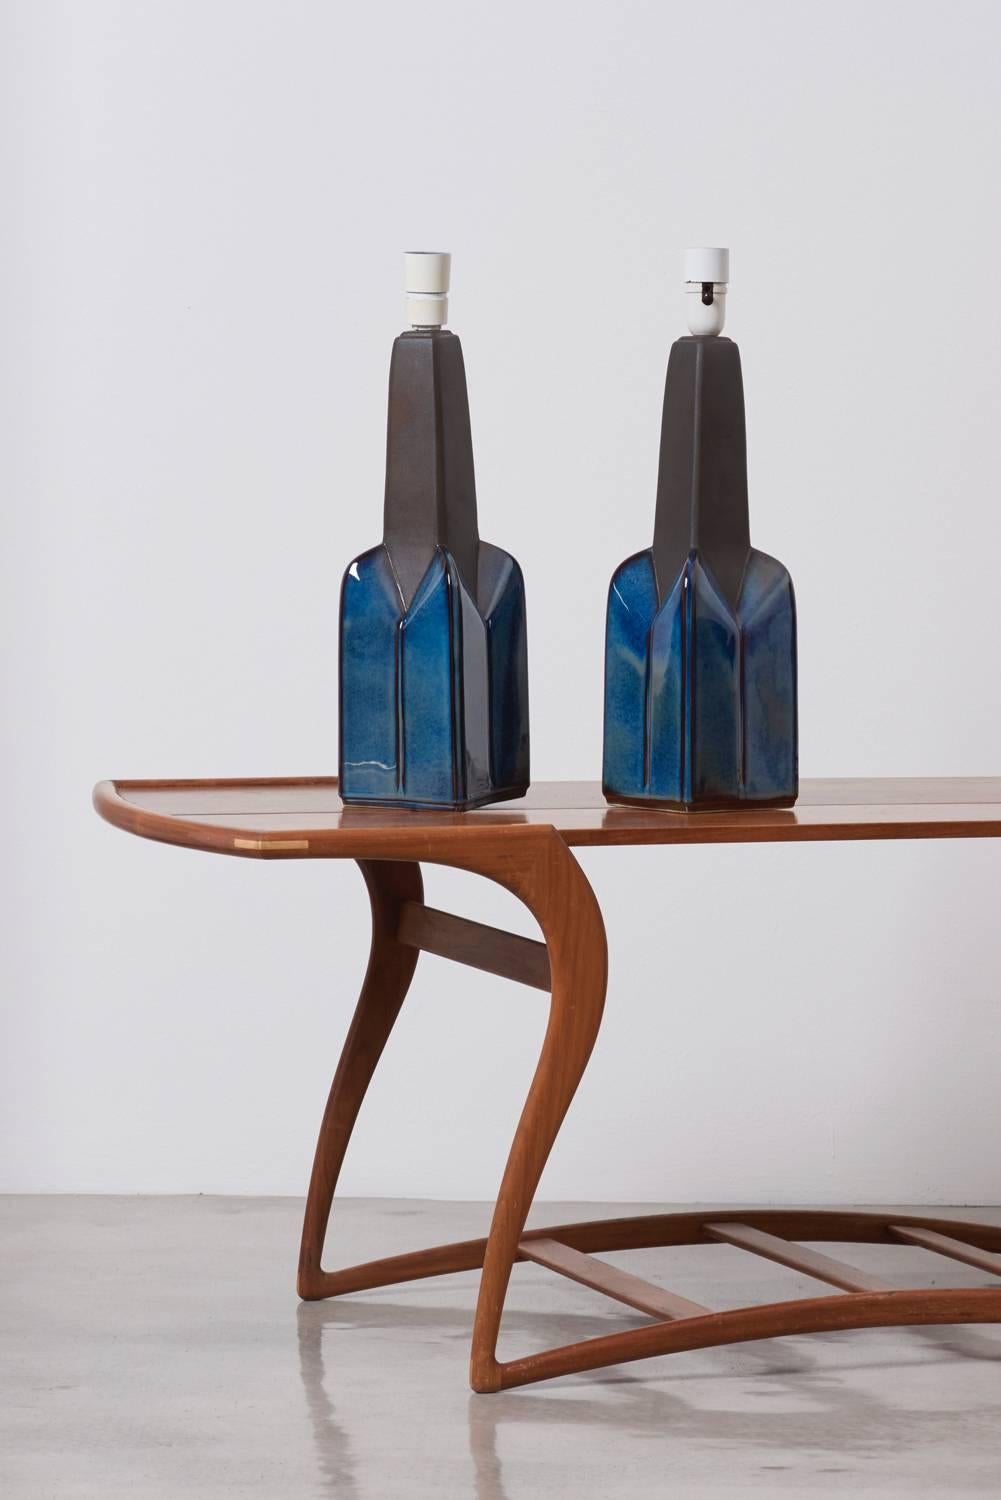 A pair of blue ceramic table lamps by Søholm Stentøj, Denmark. Marked by Søholm and in mint condition. One E27 each.
To be on the safe side, the lamp should be checked locally by a specialist concerning local requirements.

